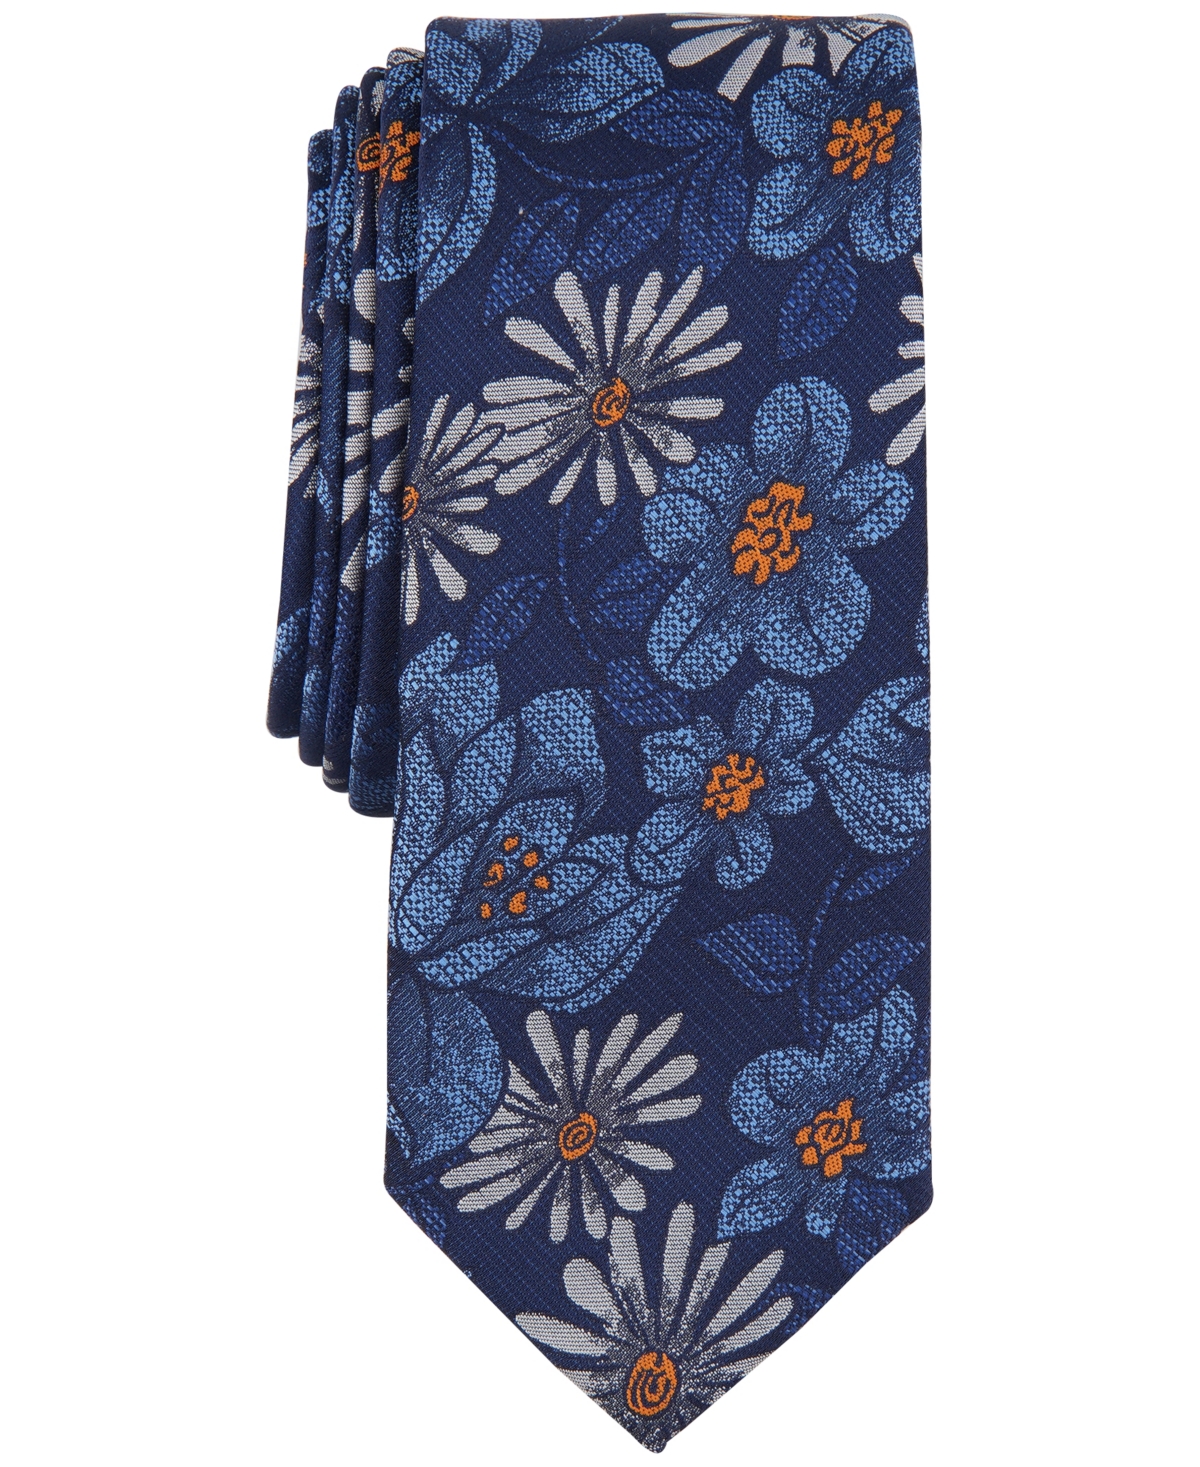 Bar Iii Men's Saville Floral Tie, Created for Macy's